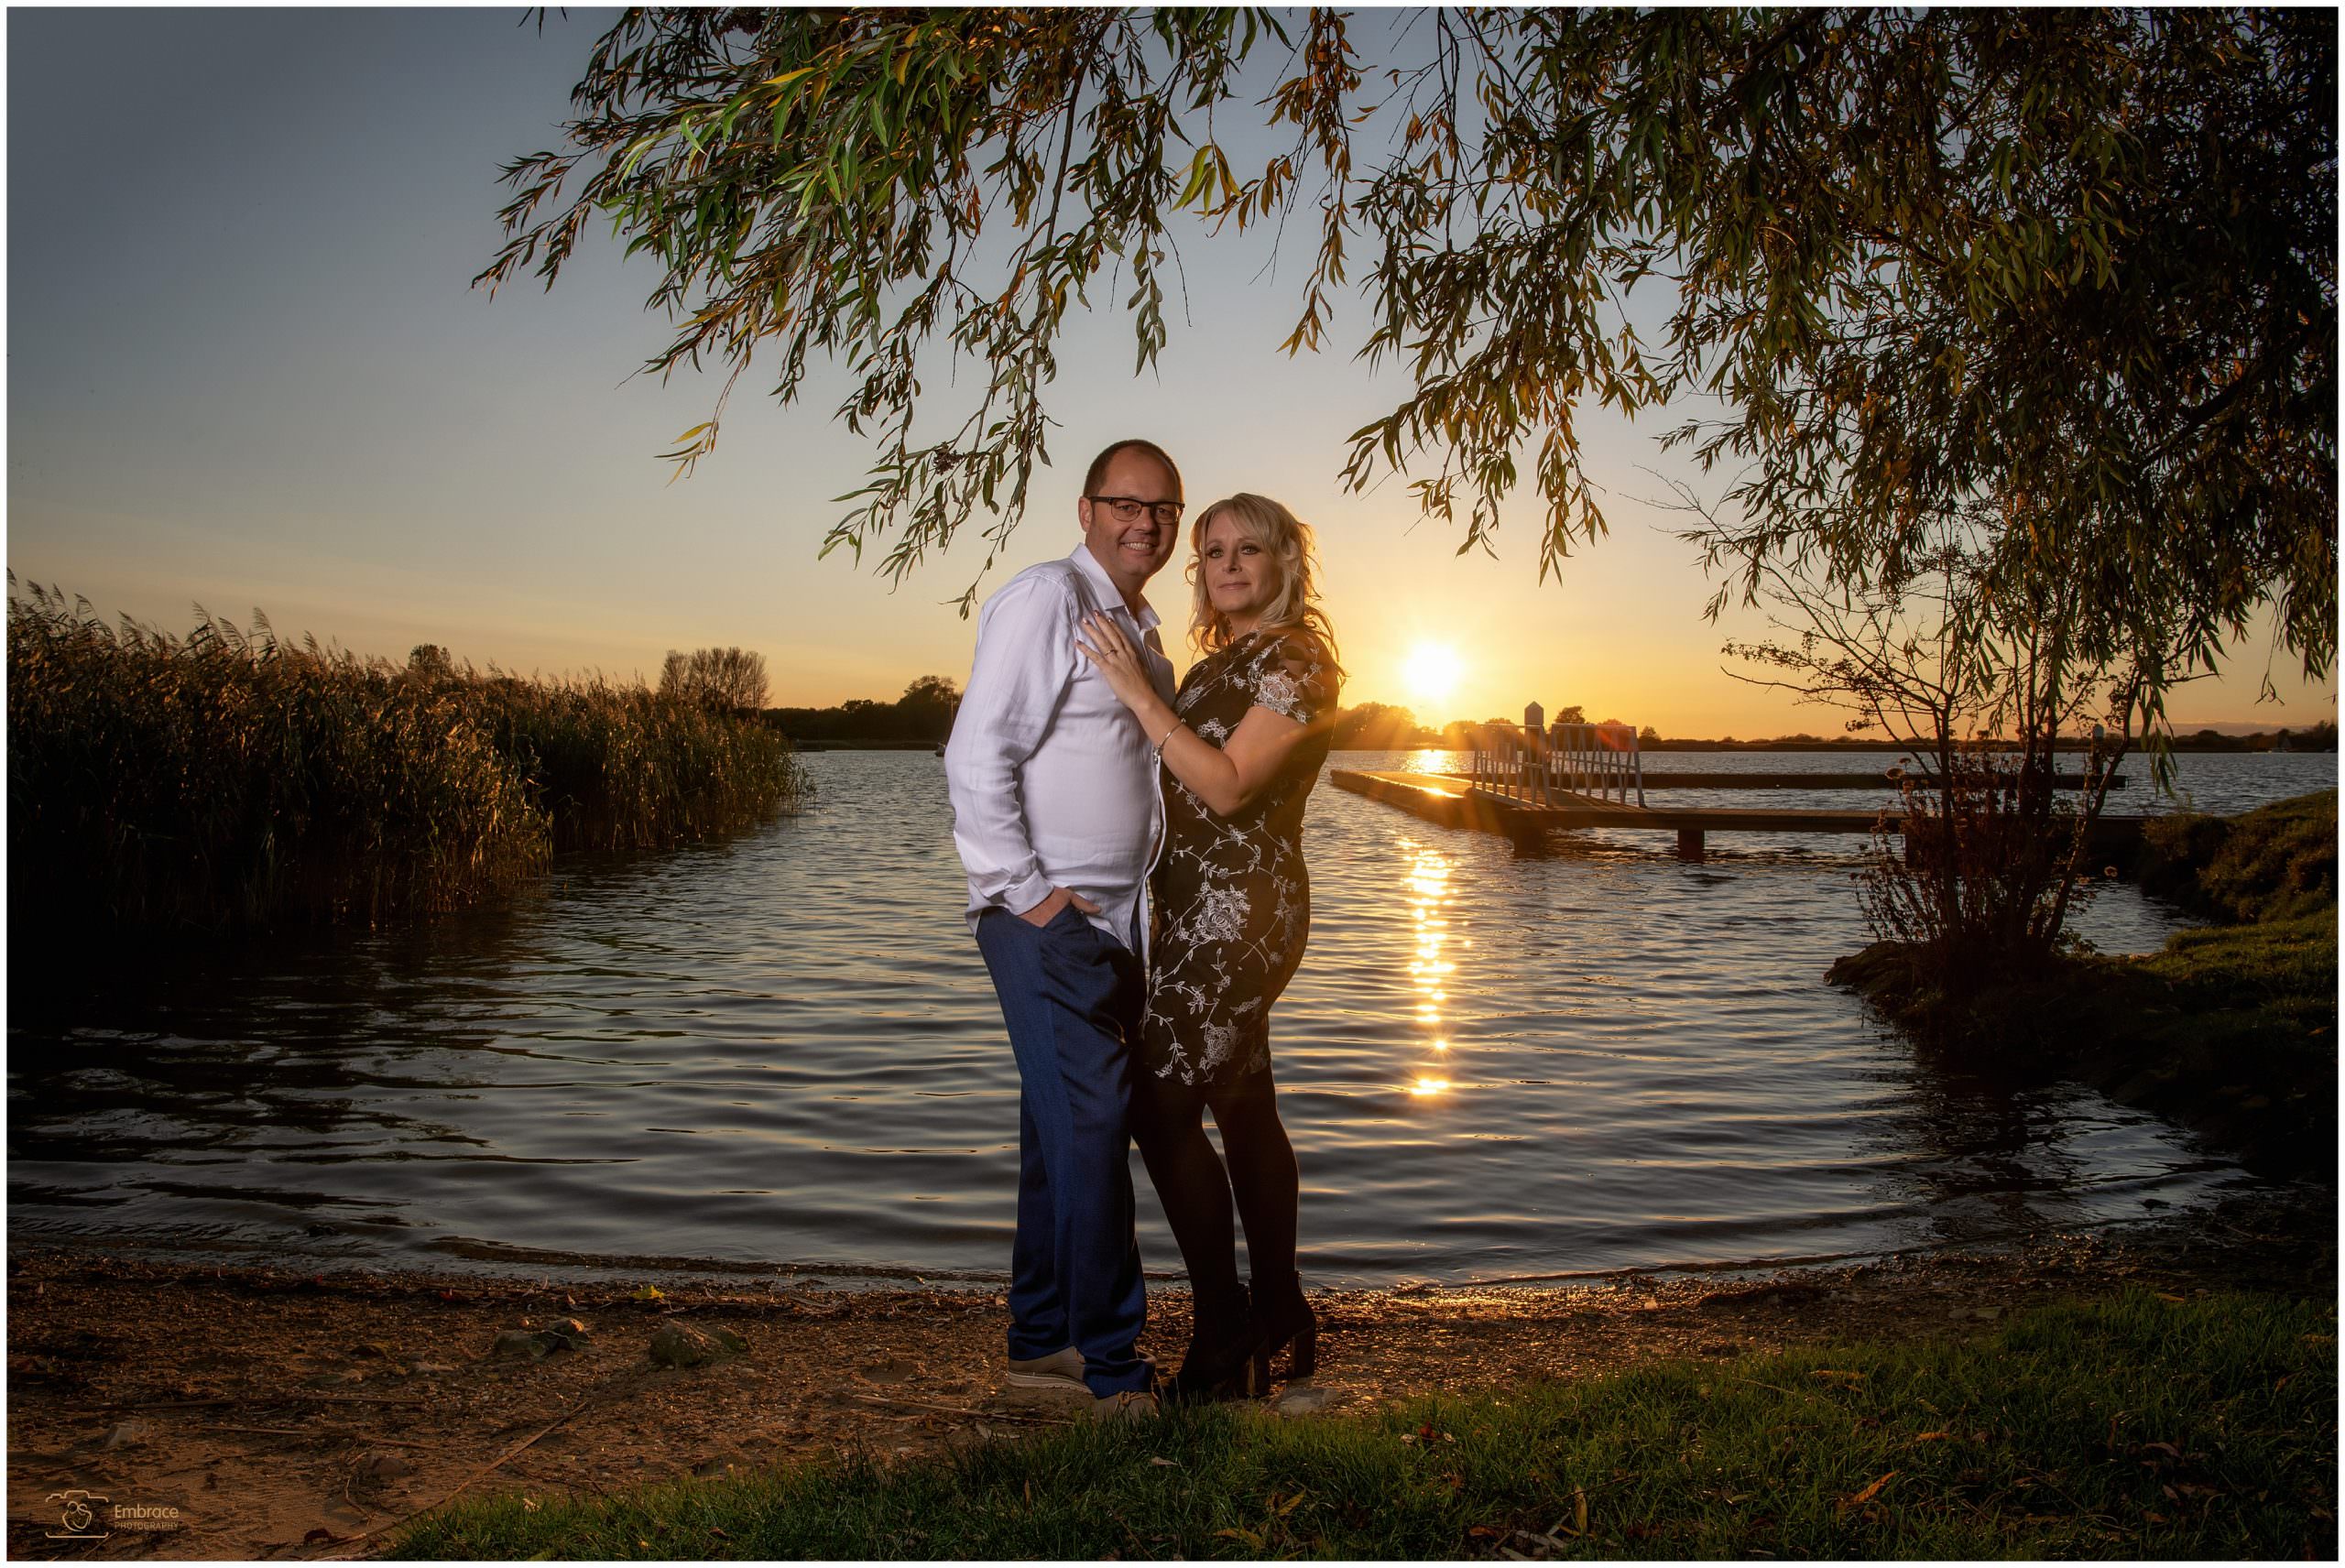 Engagement shoot in Oulton Broad